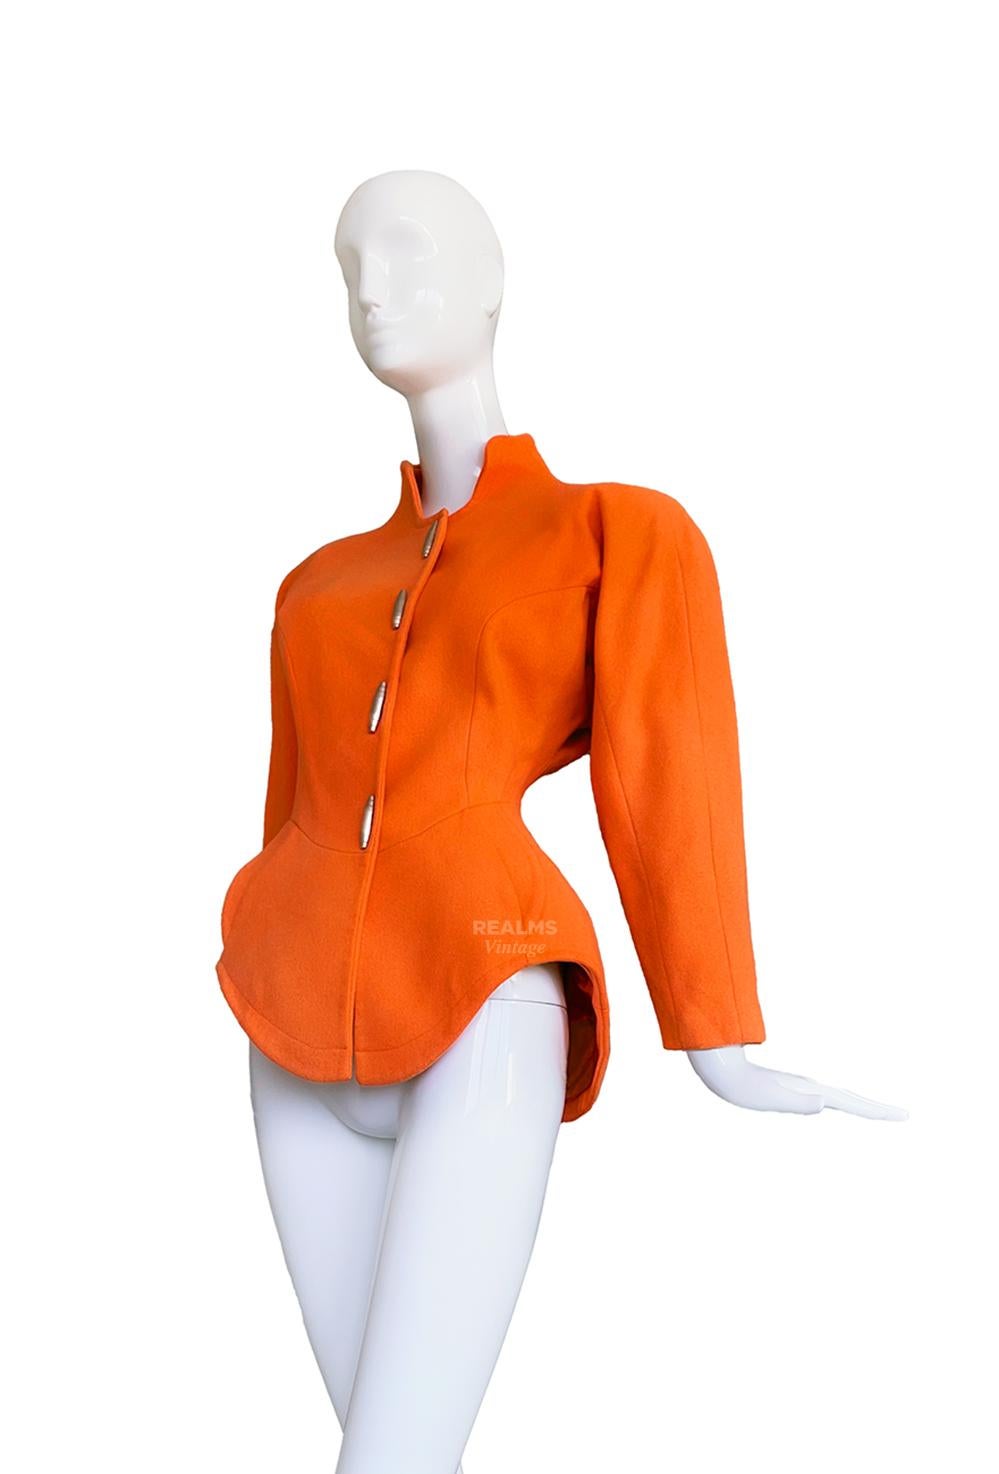 Thierry Mugler 1991 Documented Sculptural Orange Jacket with Metal Details In Good Condition For Sale In Berlin, BE